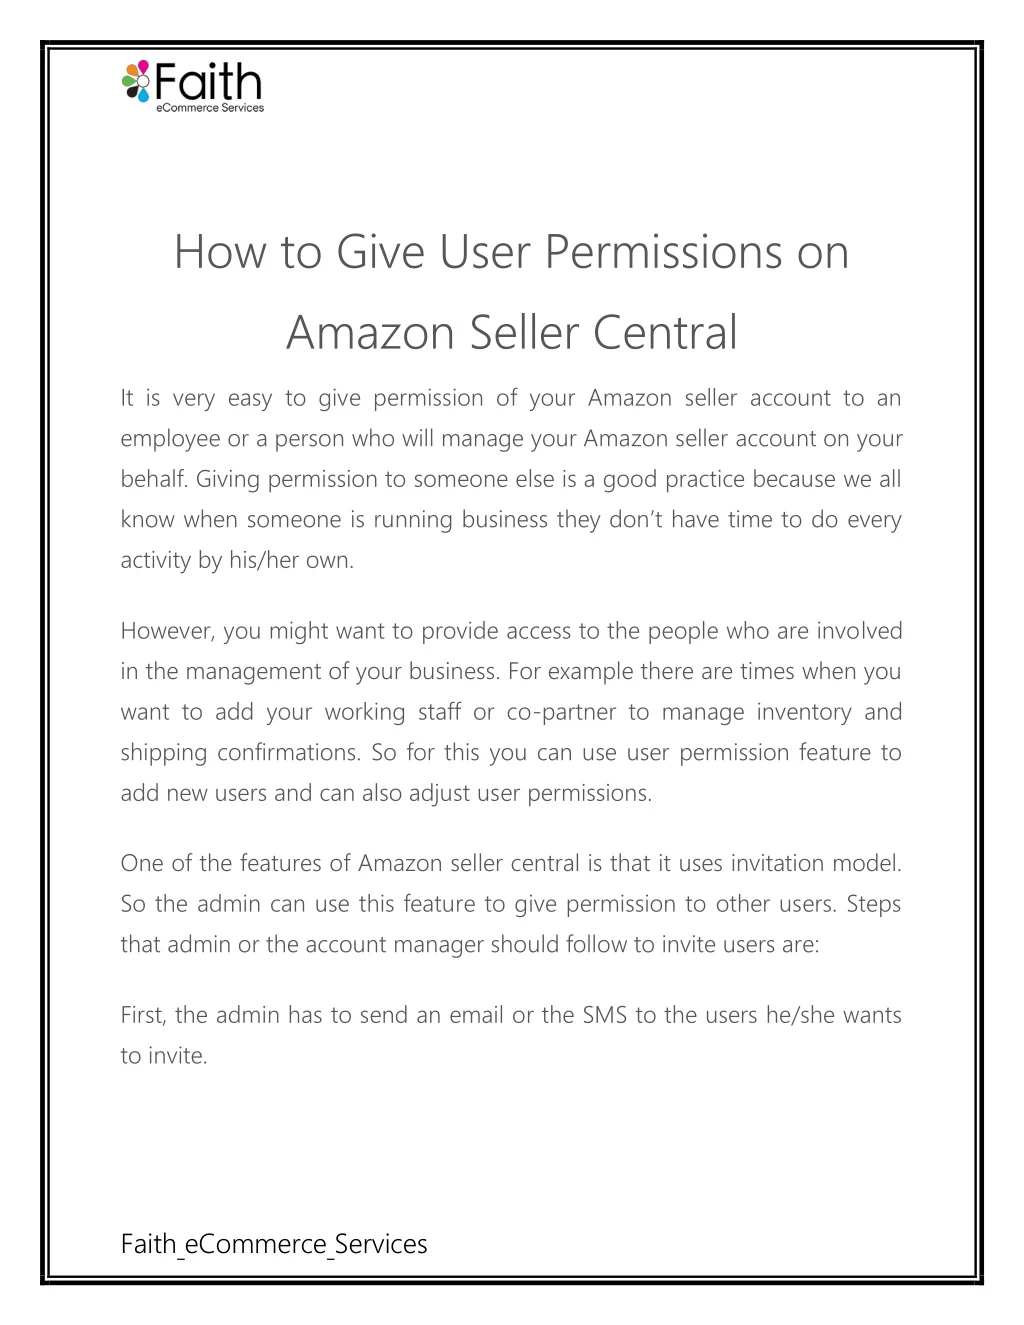 how to give user permissions on amazon seller